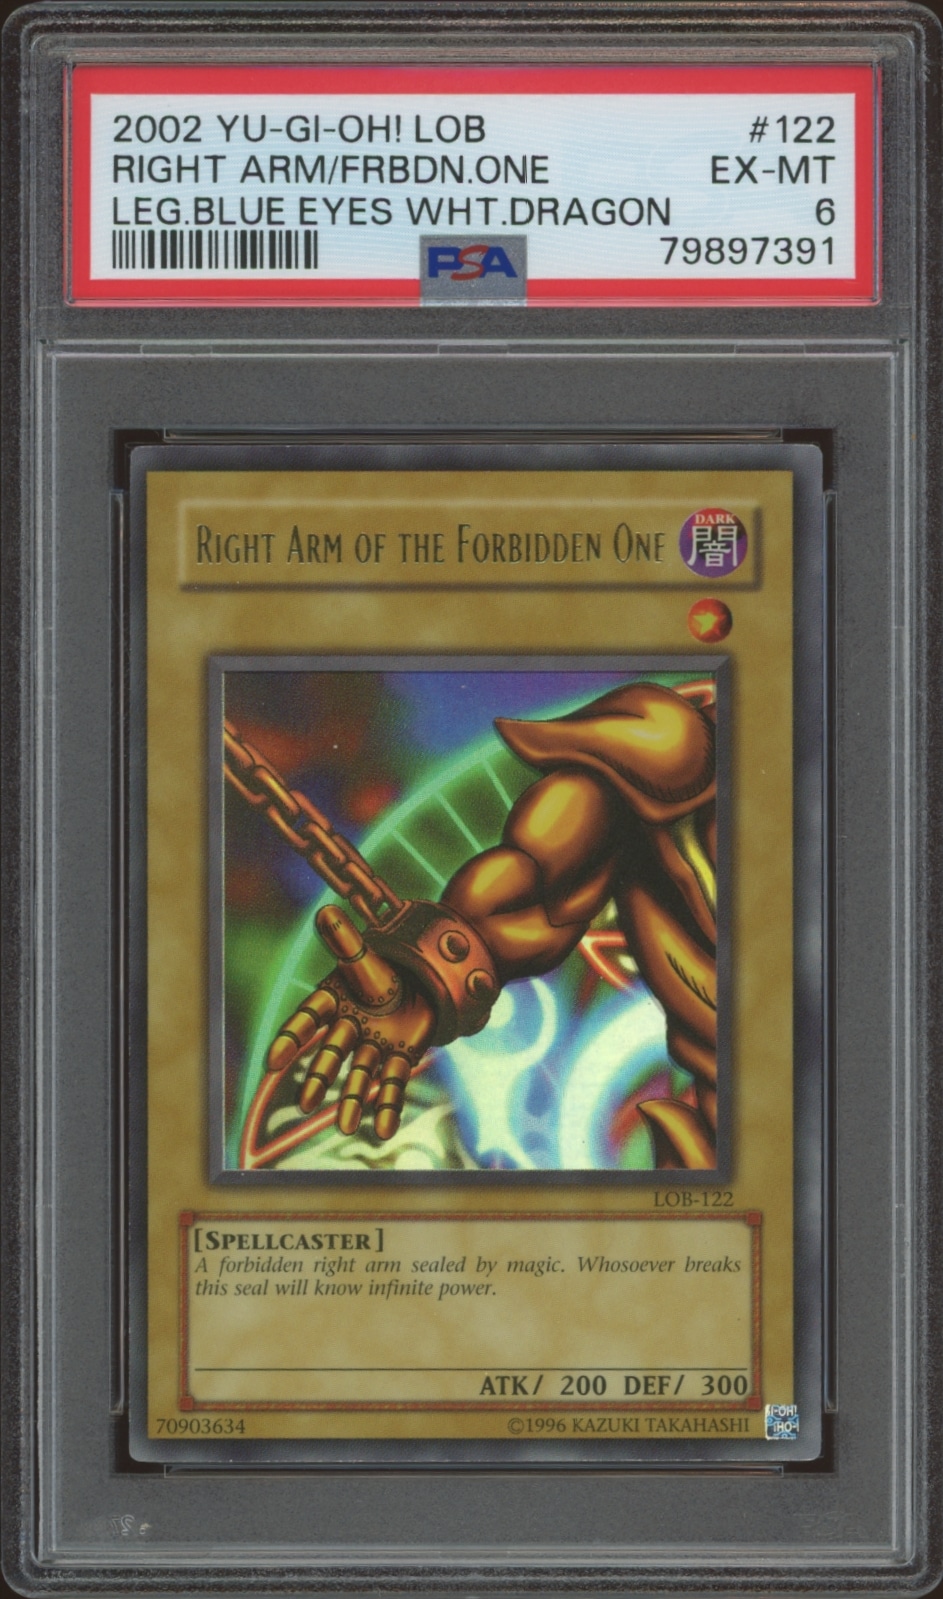 Yu-Gi-Oh! 2002 graded Right Arm of the Forbidden One card from Legend of Blue Eyes set.